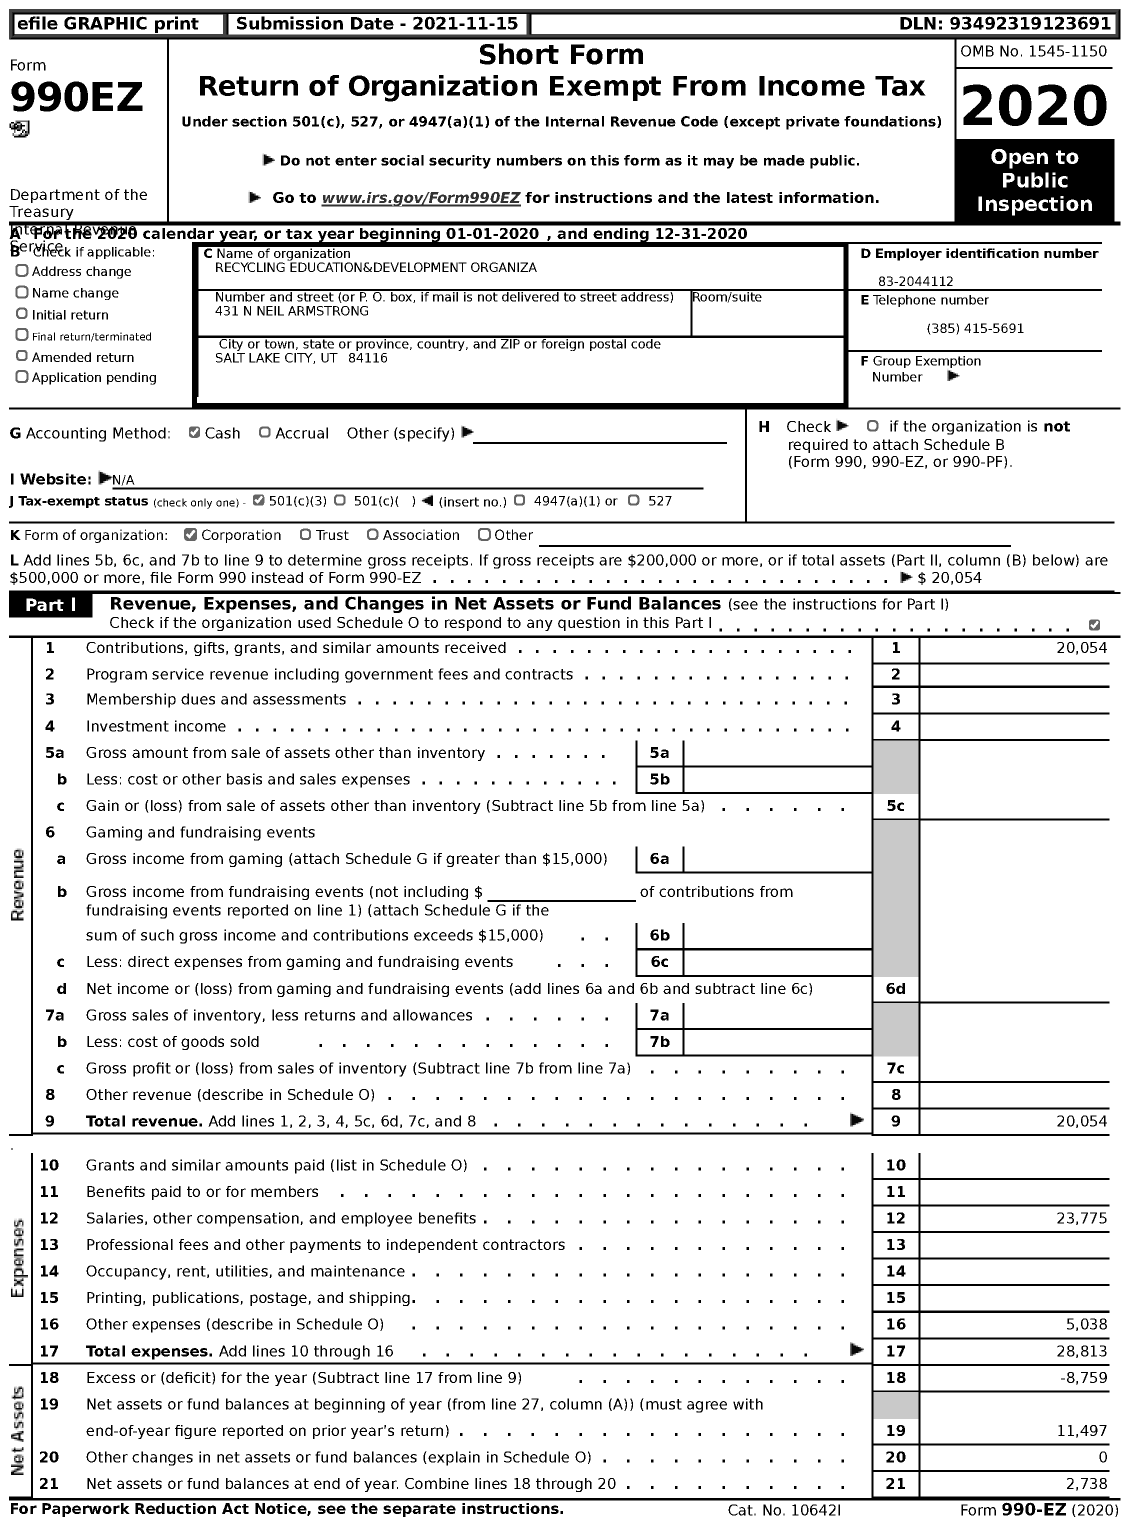 Image of first page of 2020 Form 990EZ for Recycling Education and Development Organization